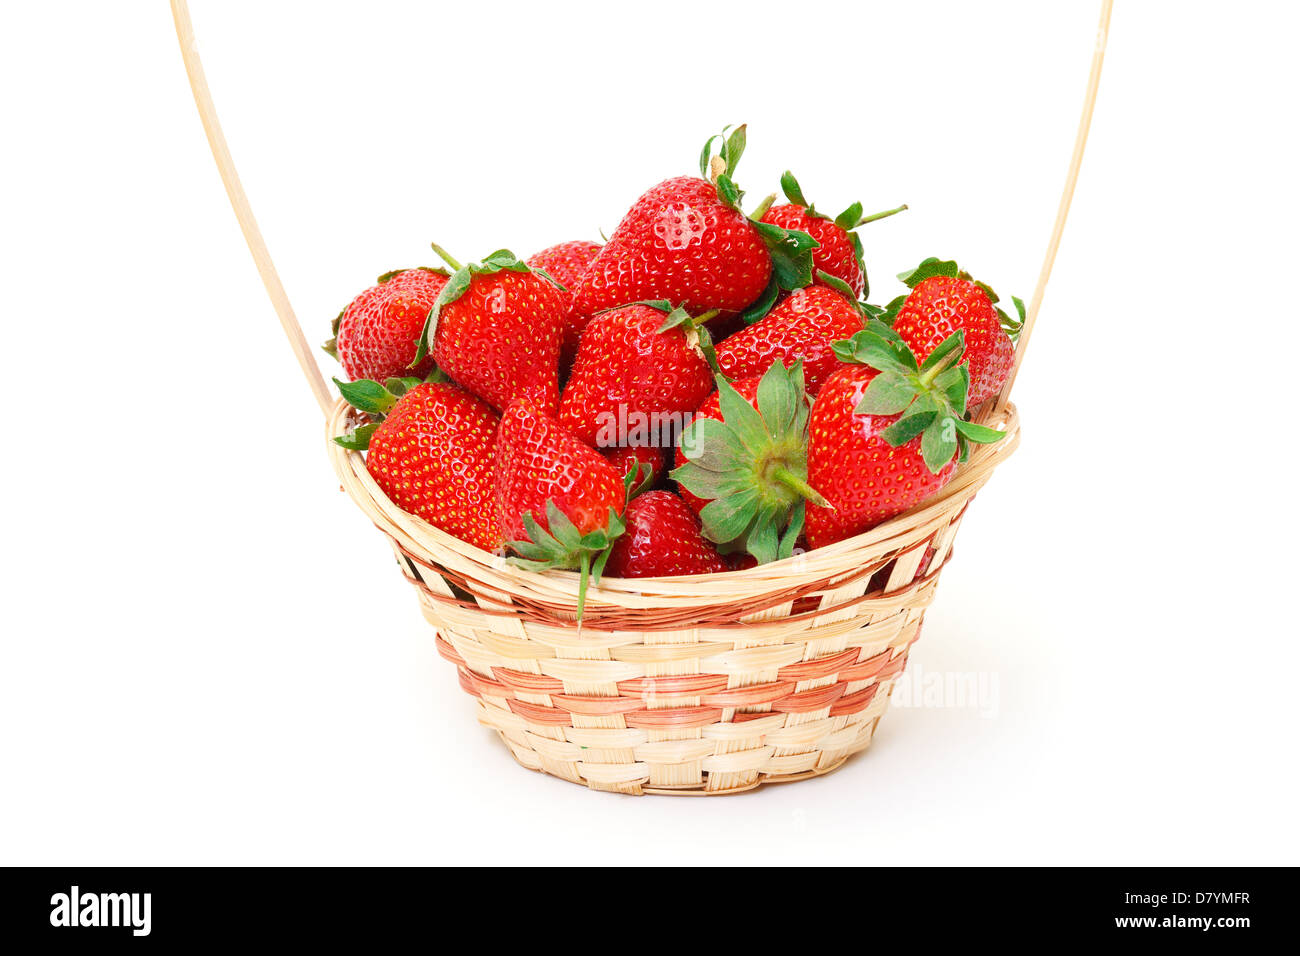 Ripe Red Strawberries in basket, on white background Stock Photo